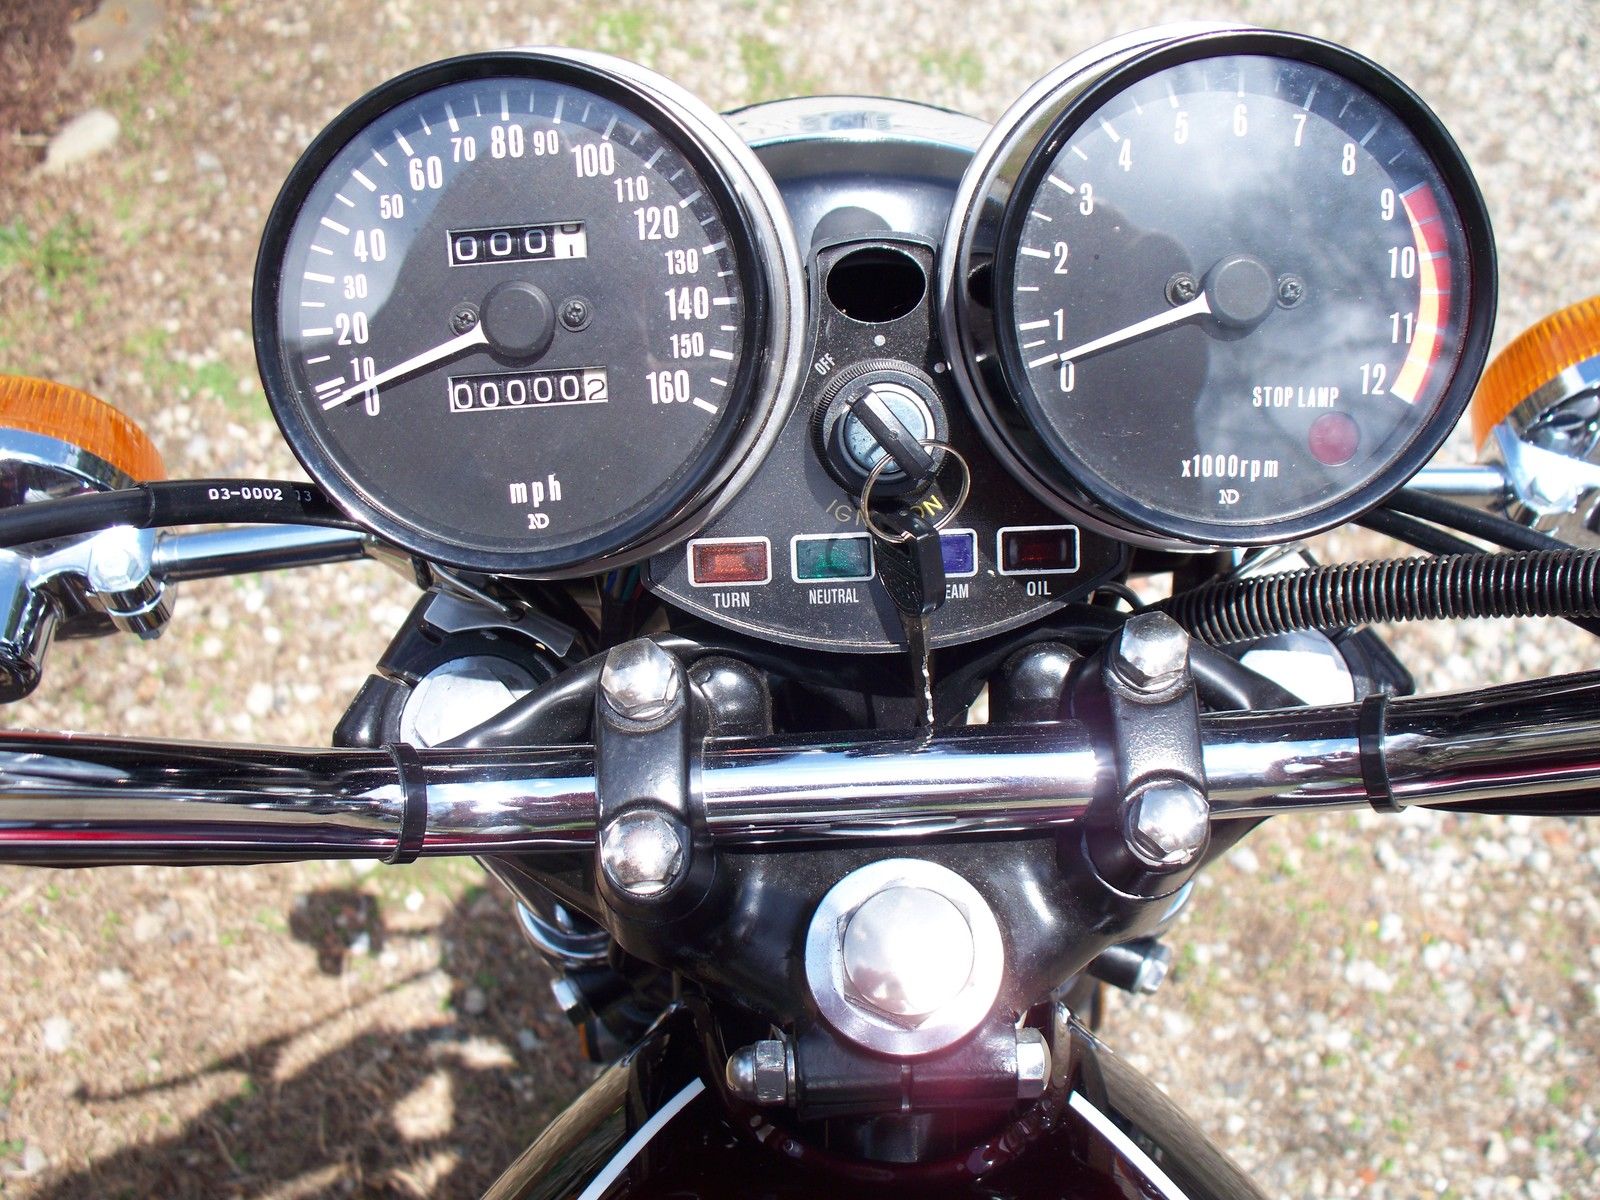 Kawasaki Z1 - 1975 - Restored Gauges, Speedo and Tacho, Ignition Switch and Lights.